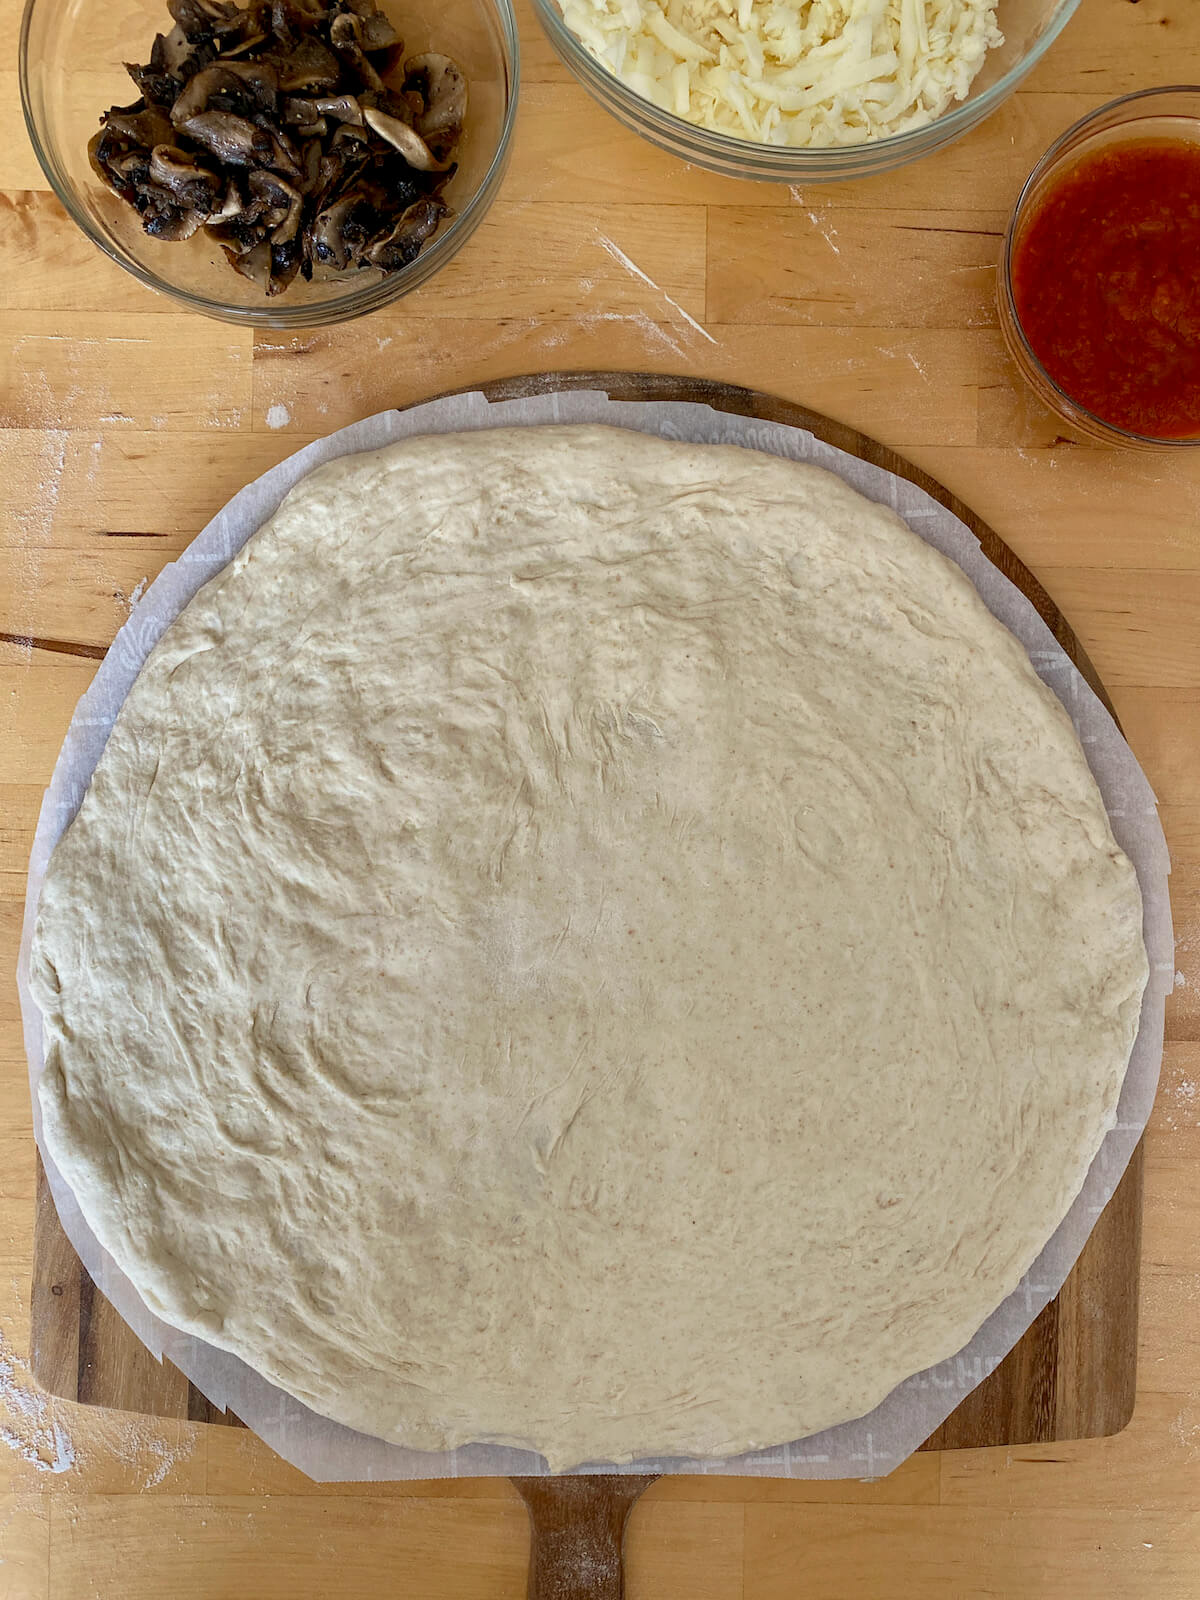 Sourdough discard pizza dough stretched out on a parchment-lined pizza peel. The stretched dough is surrounded by bowls of ingredients such as cooked mushrooms, shredded mozzarella cheese, and tomato sauce.